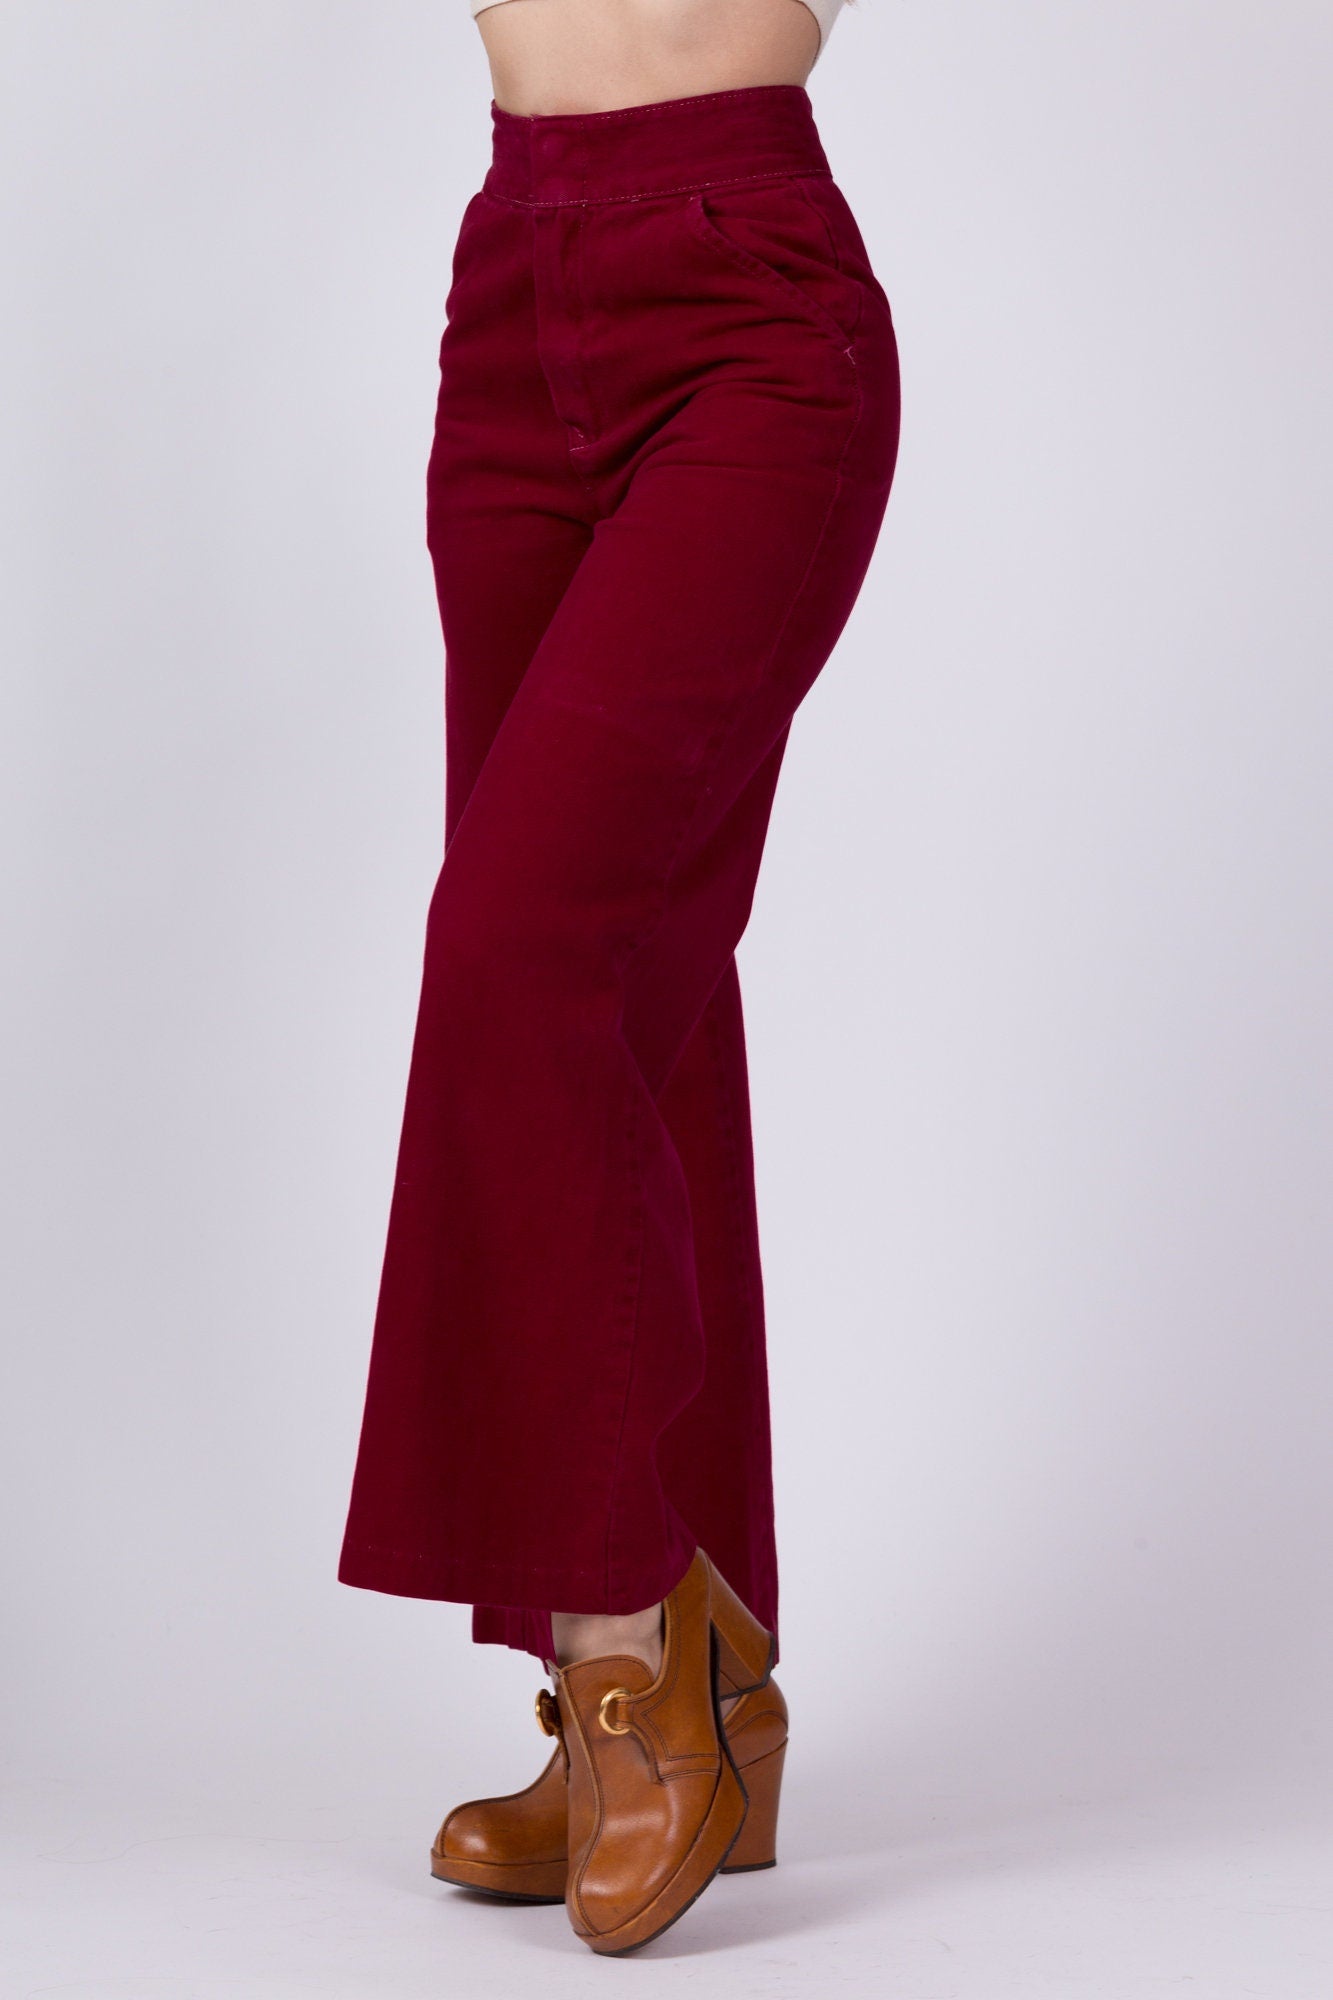 70s Wine Red High Waist Flared Cotton Twill Pants - Extra Small, 23